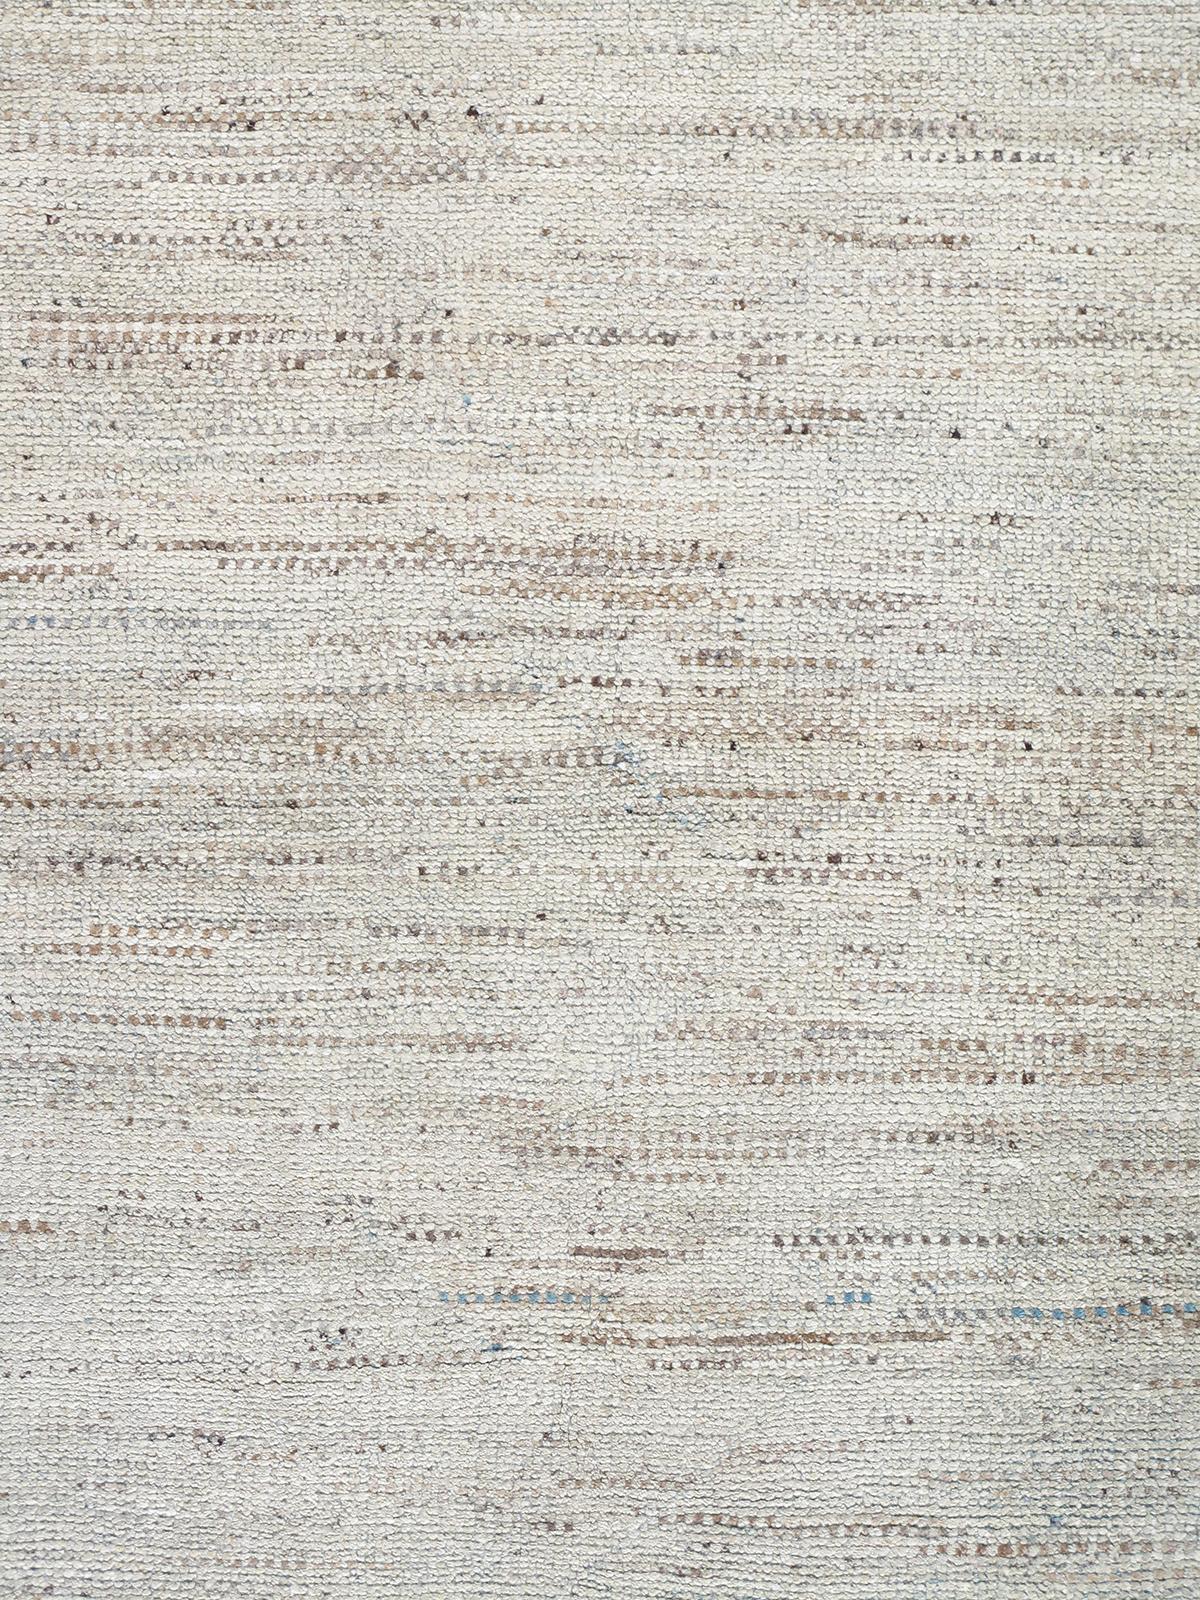 Our Sahara rug is handknotted from hand-spun, naturally dyed wool. The blue and beige modern design offers a minimalist approach with a discreet pop of color. Custom sizes and color specifications available upon request.